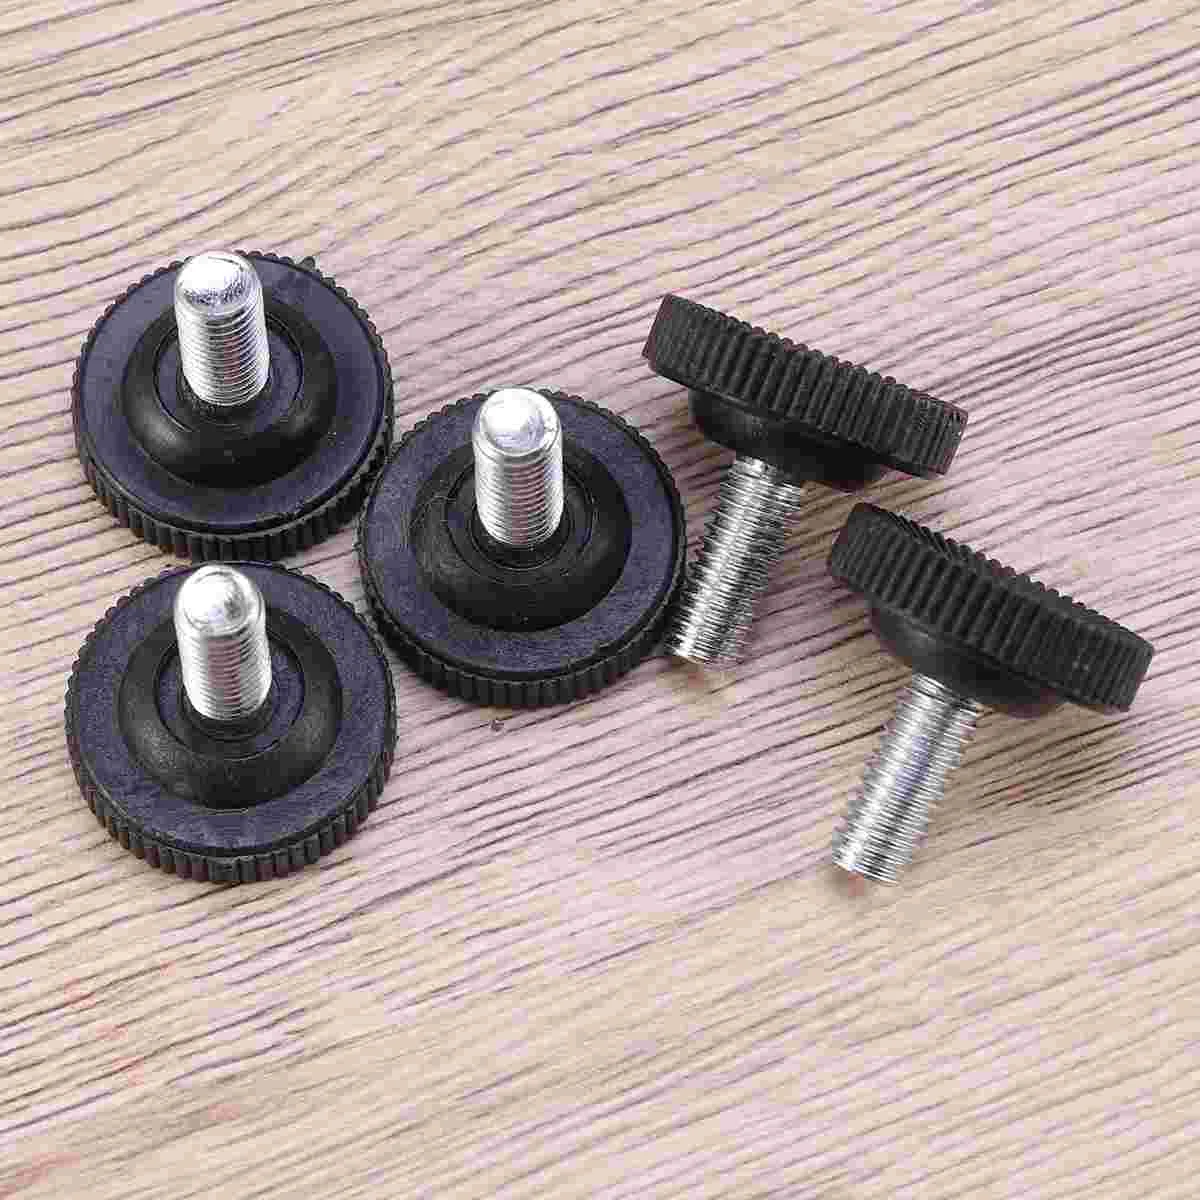 

12 PCS Heavy Duty Furniture Leveler Adjustable Tee Nuts Leg Levelers for Cabinet Table Furniture Use - M8x20mm (Black)